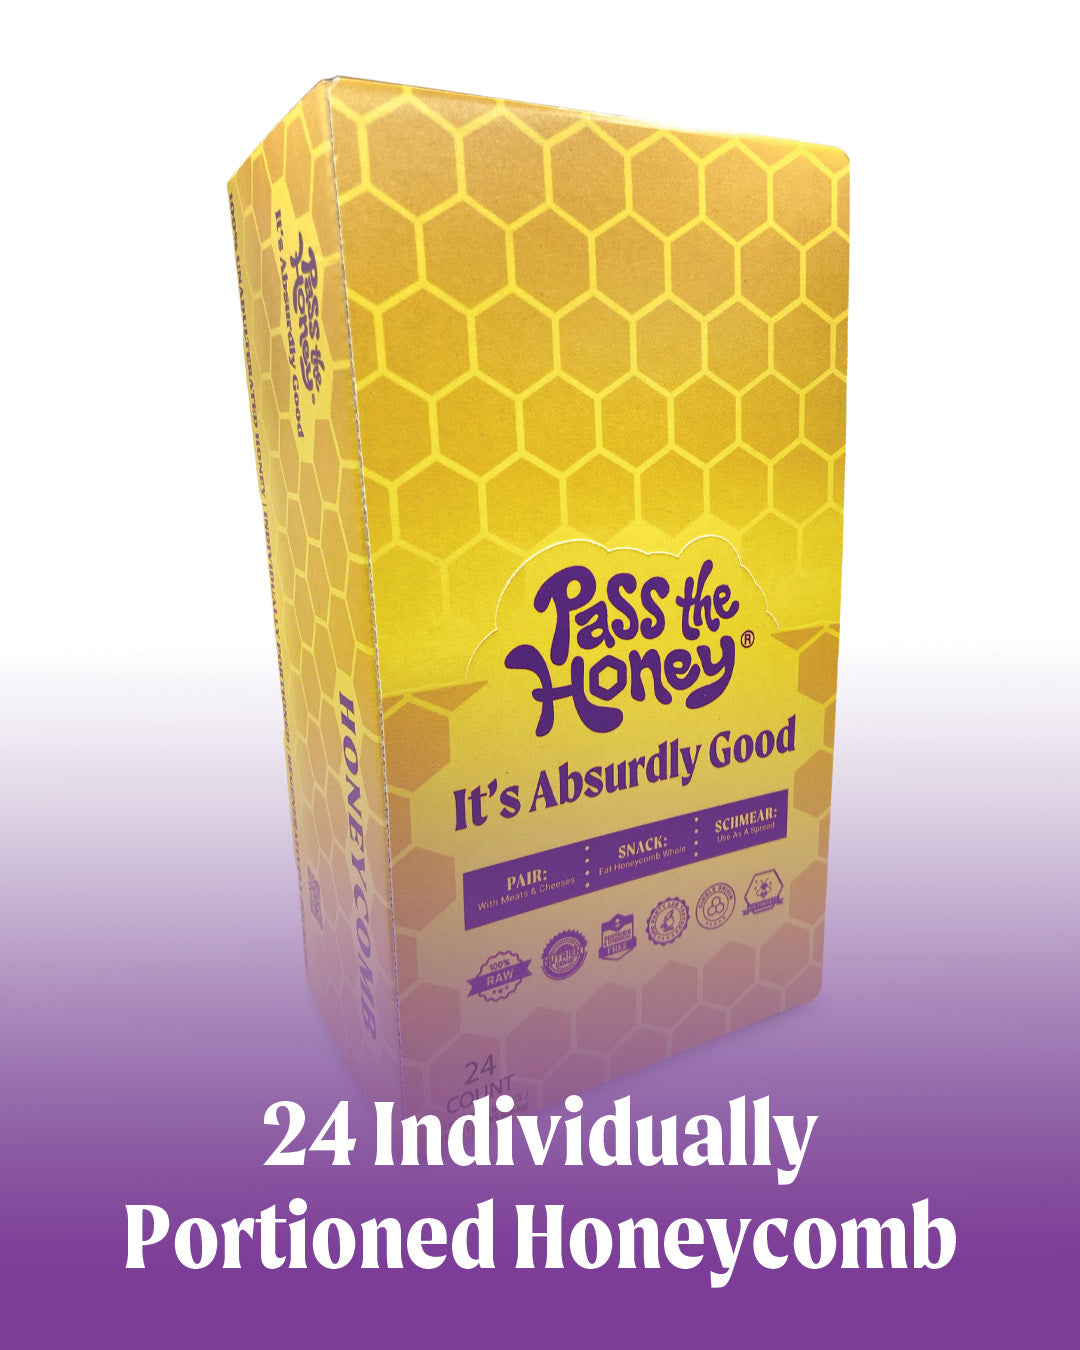 Box of 24 Individually Portioned Honeycomb